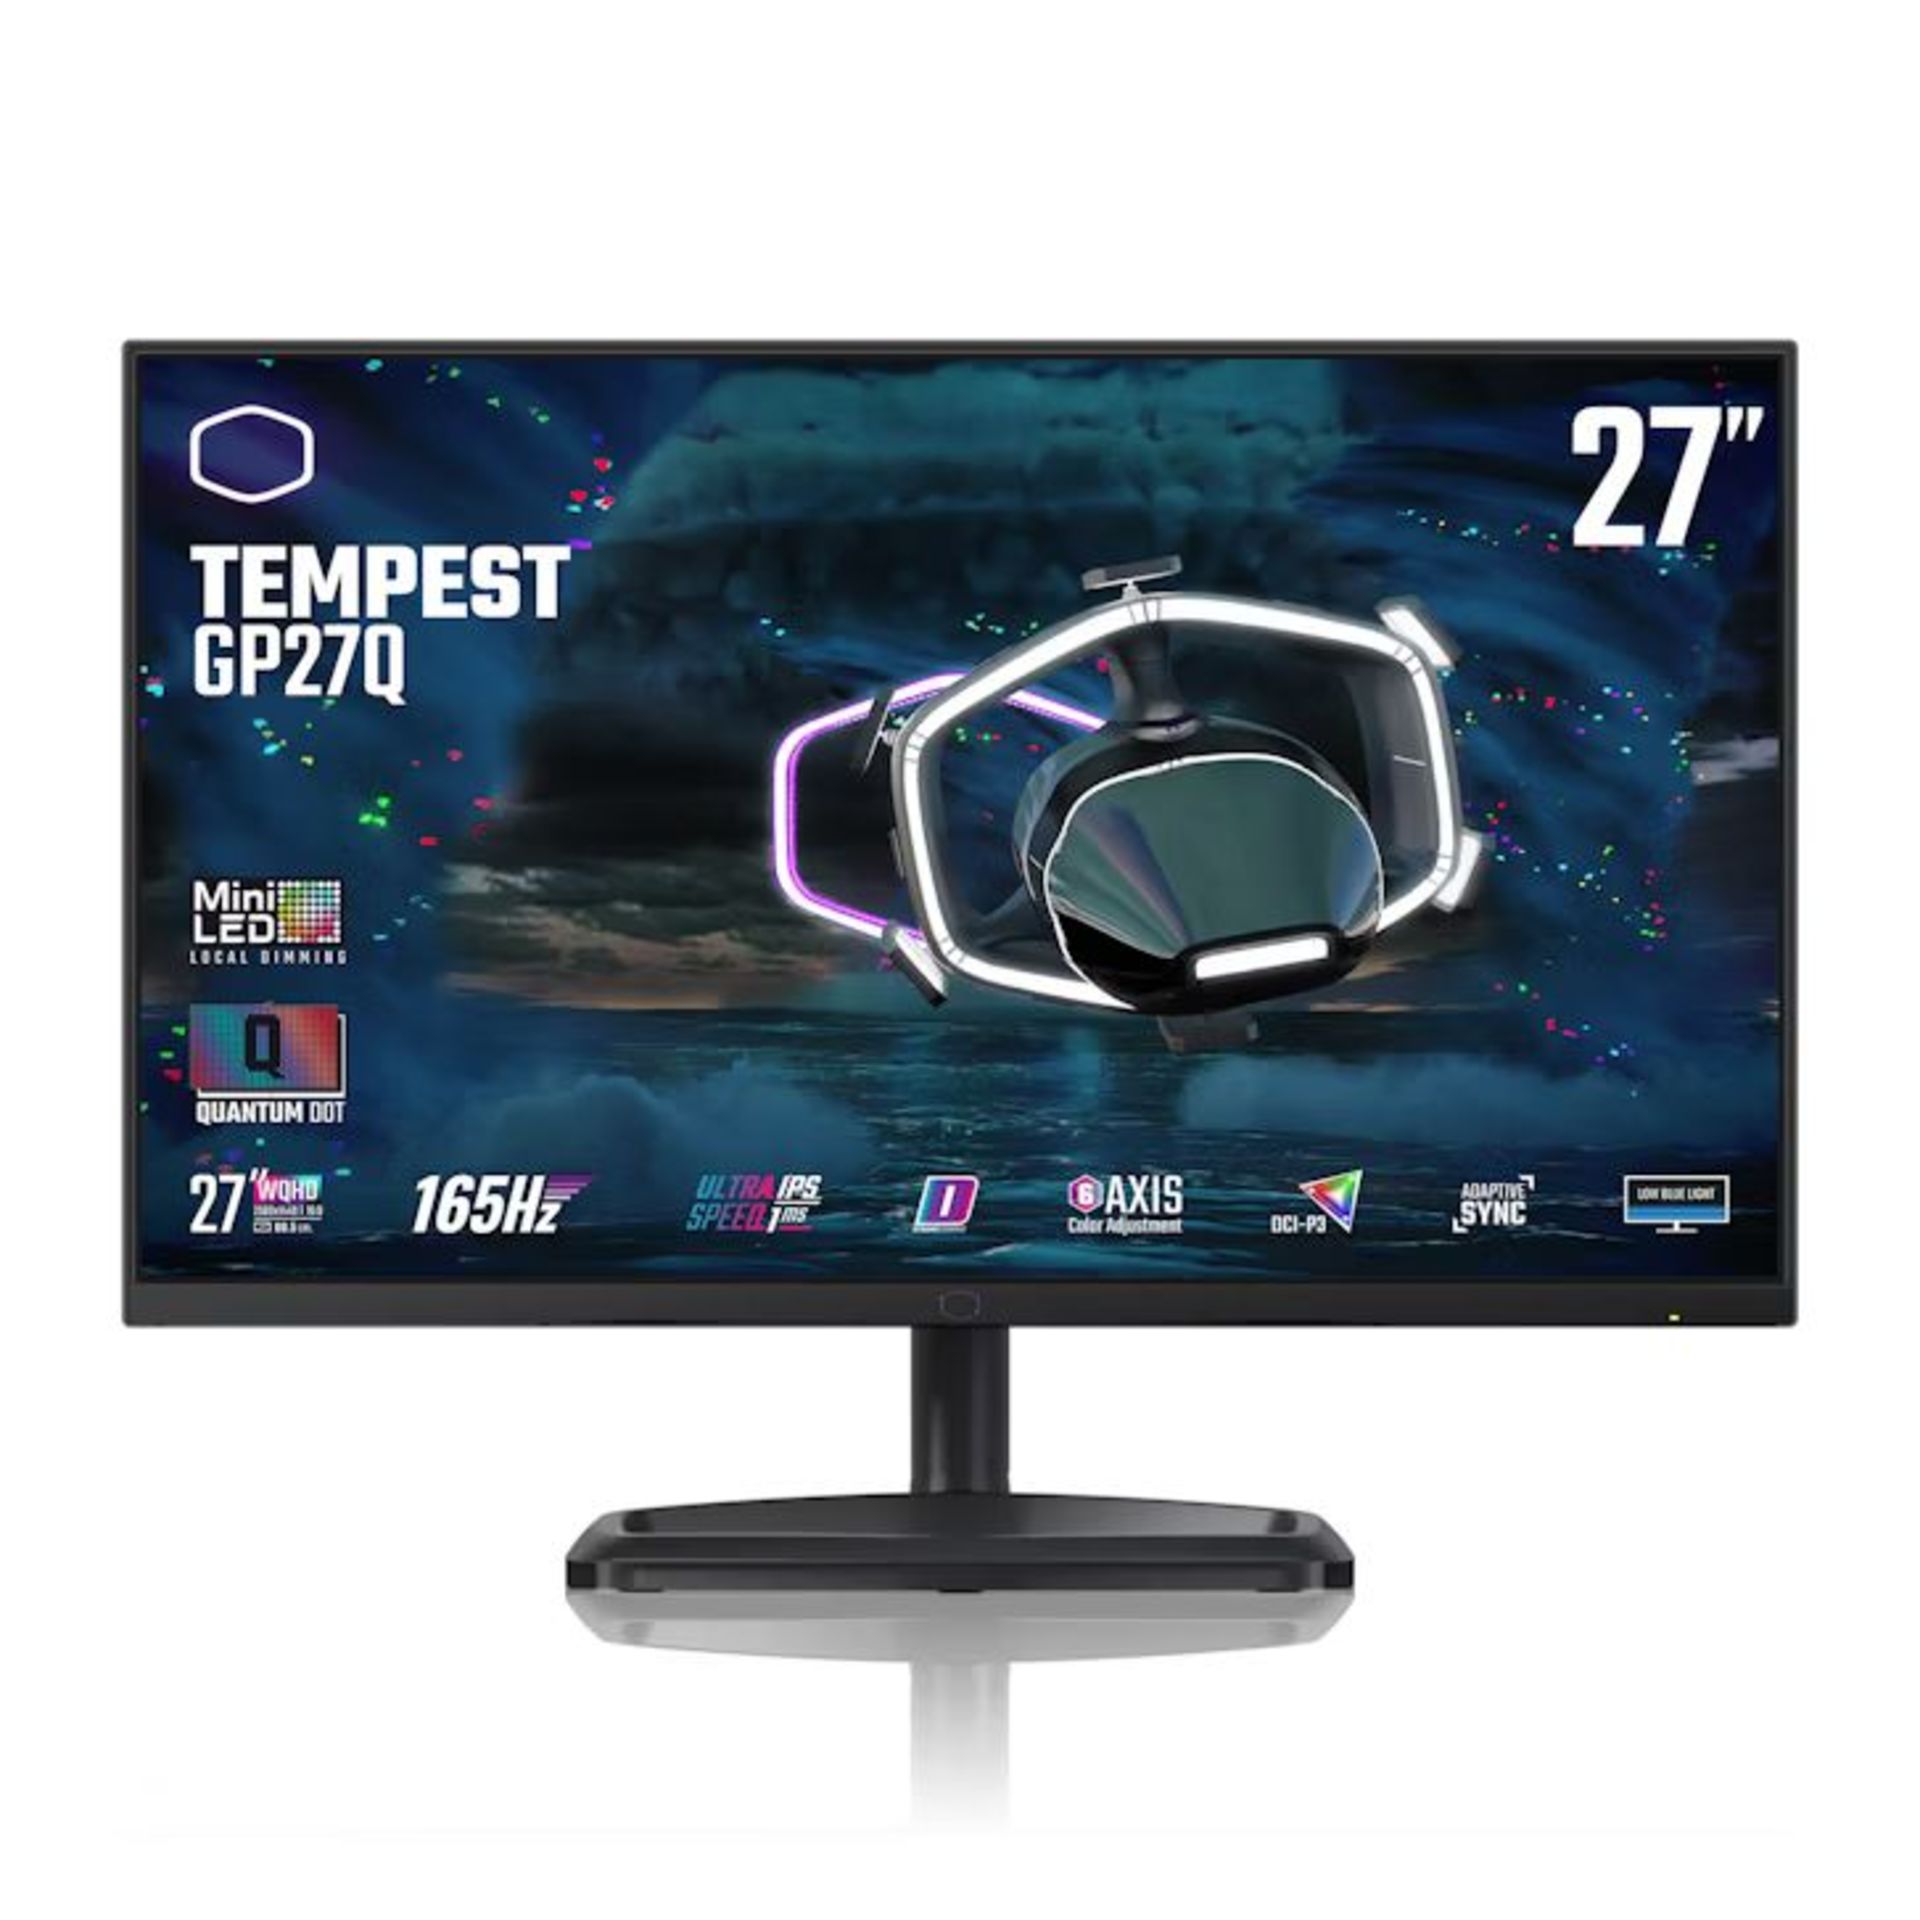 Cooler Master Tempest GP27Q 27" 2560x1440 IPS 165Hz FreeSync Mini-LED HDR Widescreen Gaming Monitor.